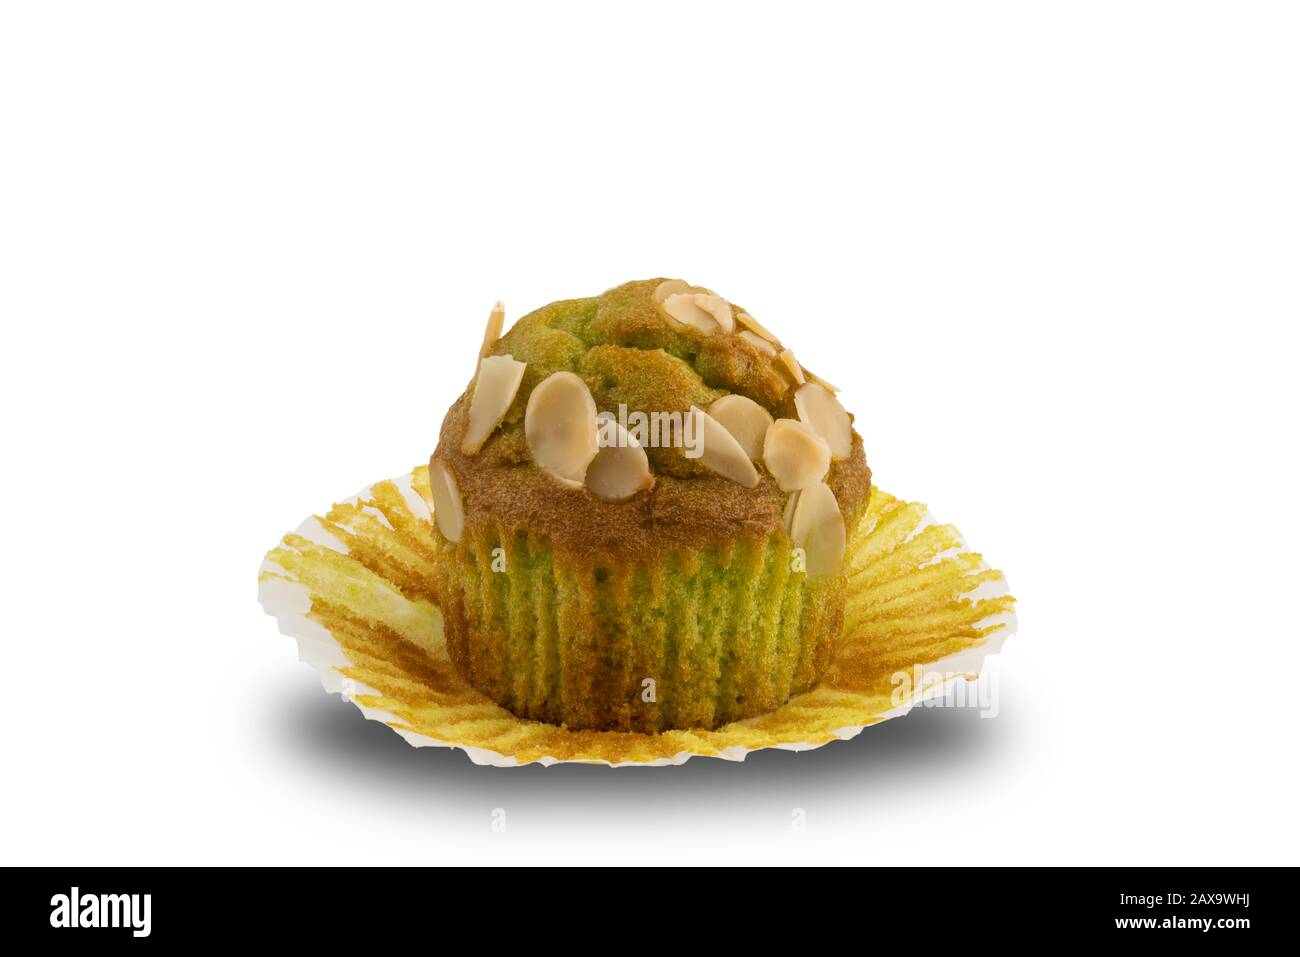 Freshly baked banana muffin on white background with clipping path Stock Photo